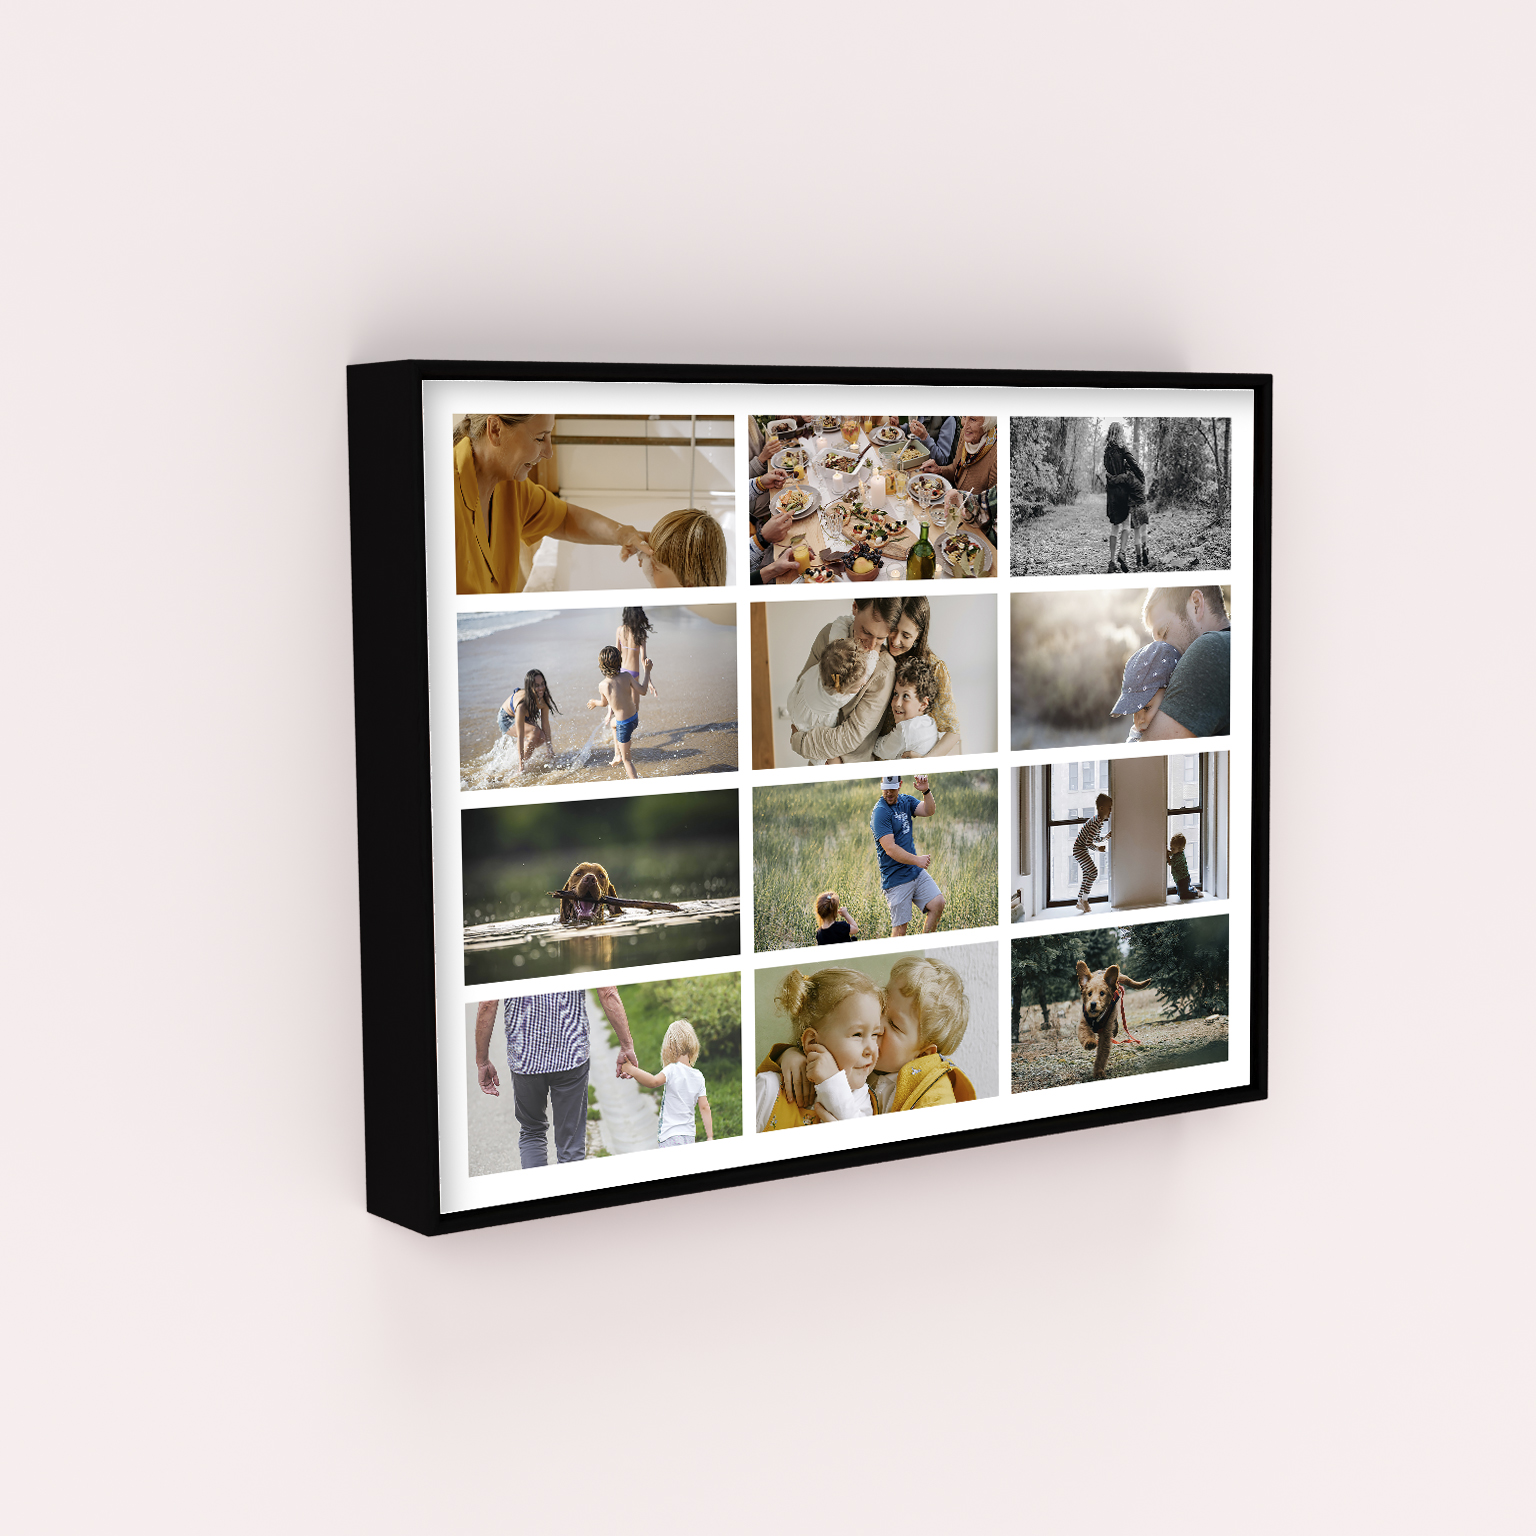 Personalized Wall Art with 10+ Landscape Photos